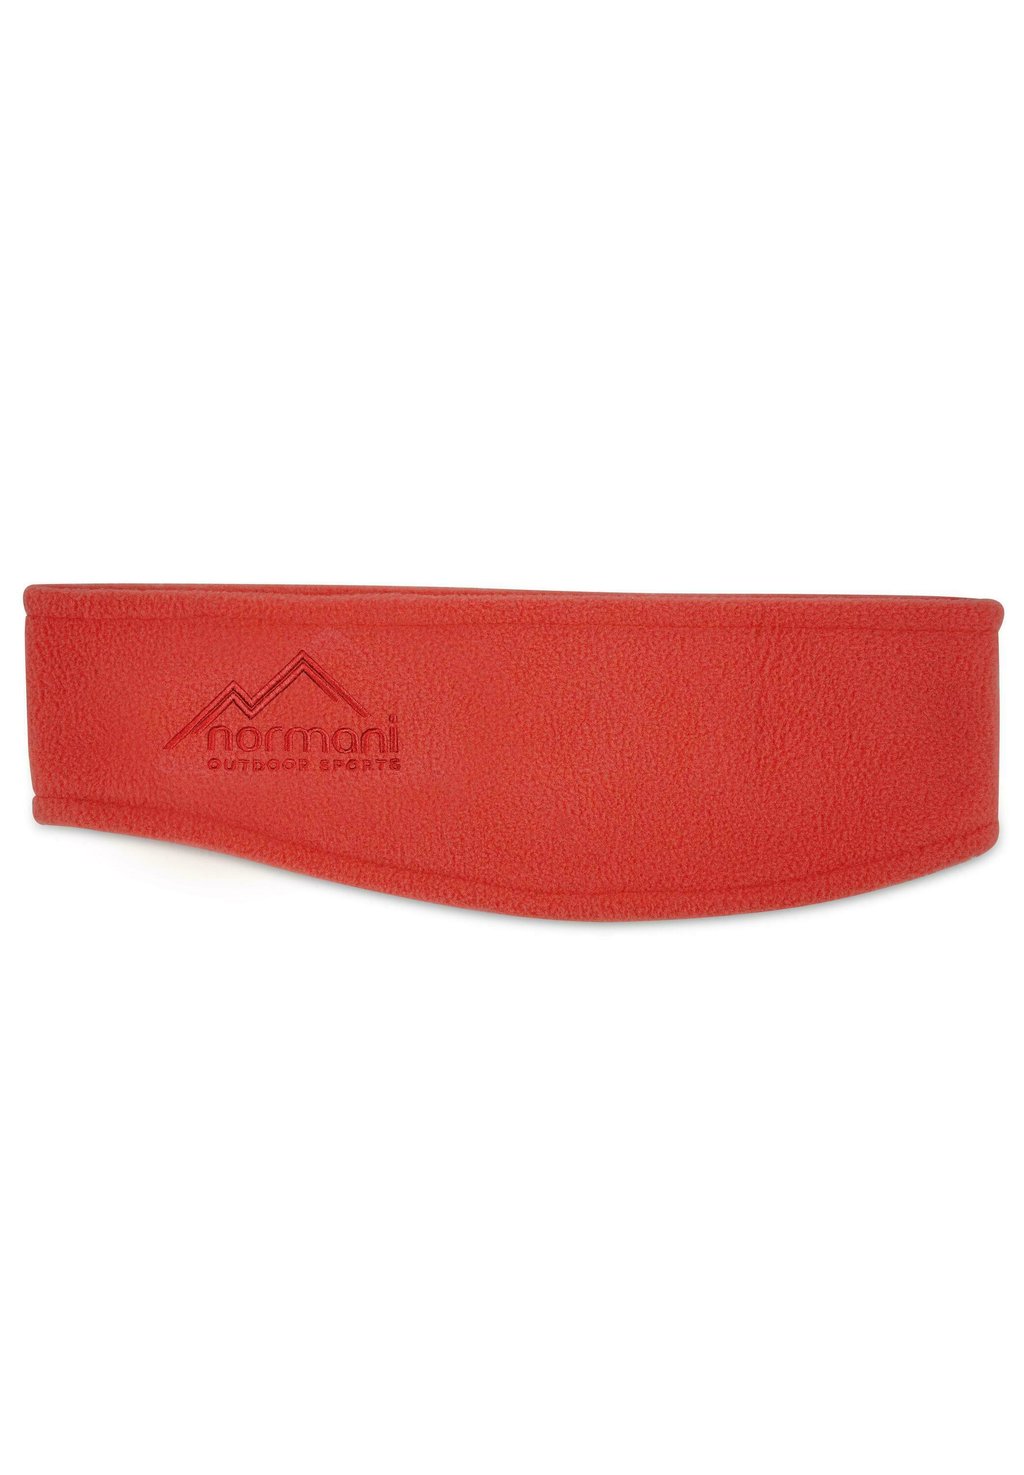 Шапка OSLO normani Outdoor Sports, цвет coral